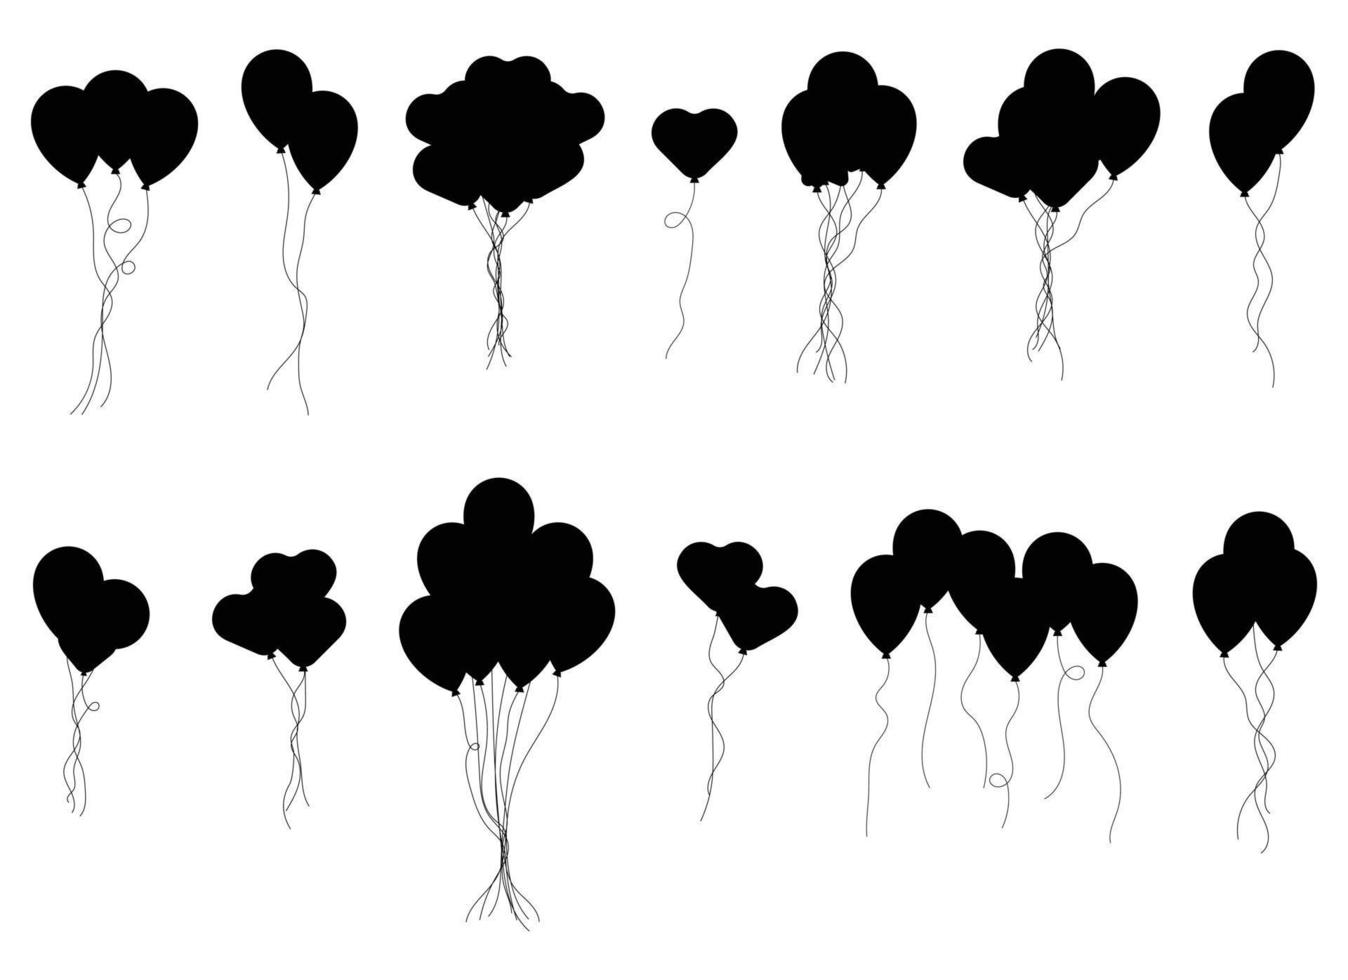 Balloons bunch silhouette in cartoon style vector illustration isolated on white